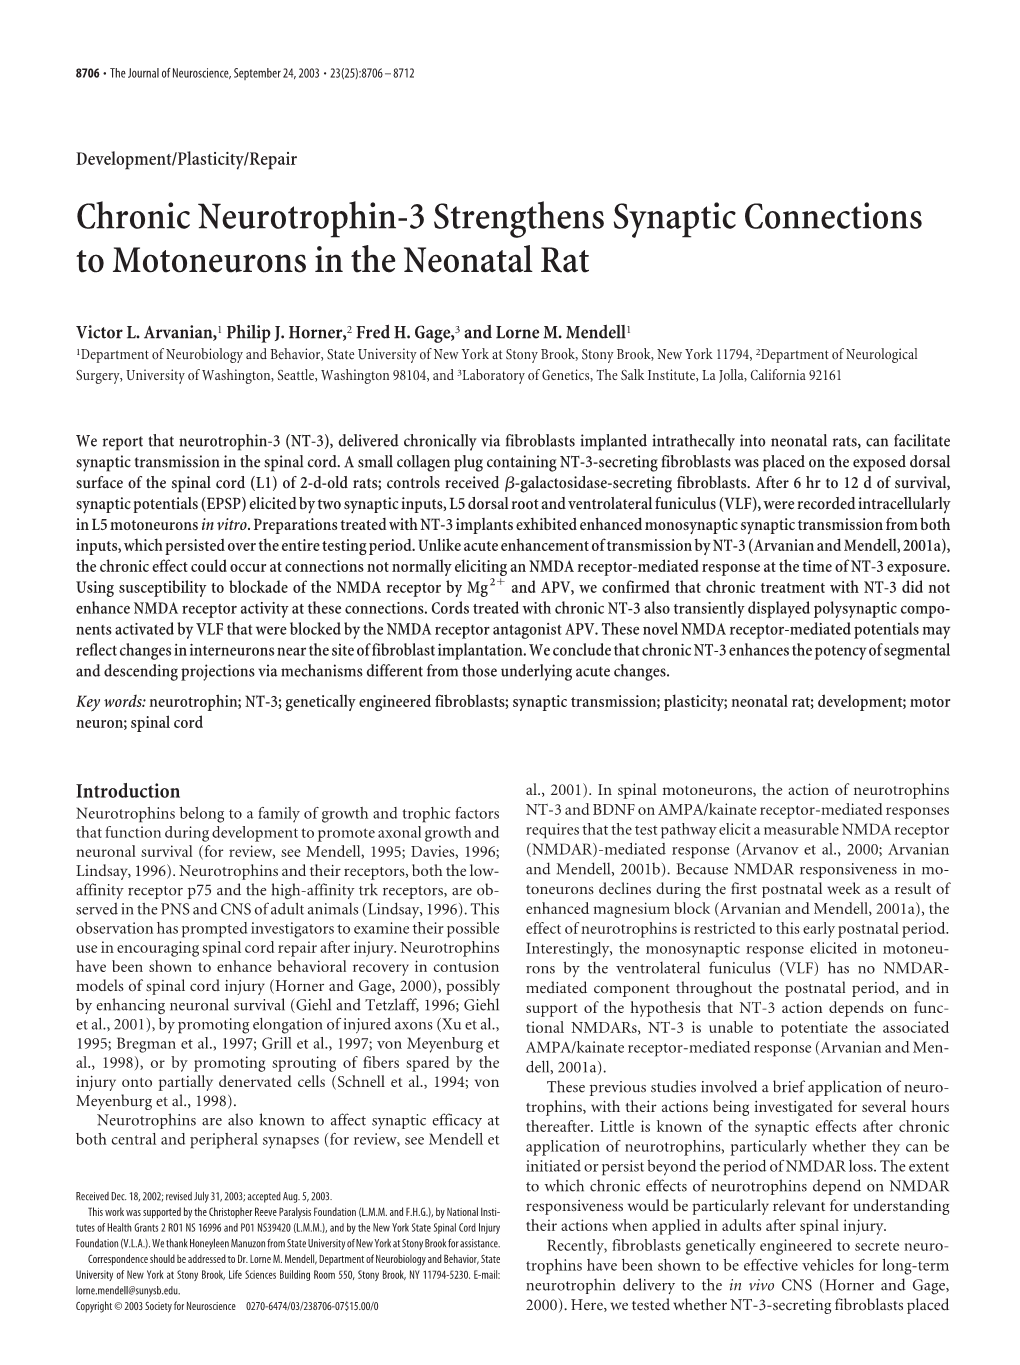 Chronic Neurotrophin-3 Strengthens Synaptic Connections to Motoneurons in the Neonatal Rat